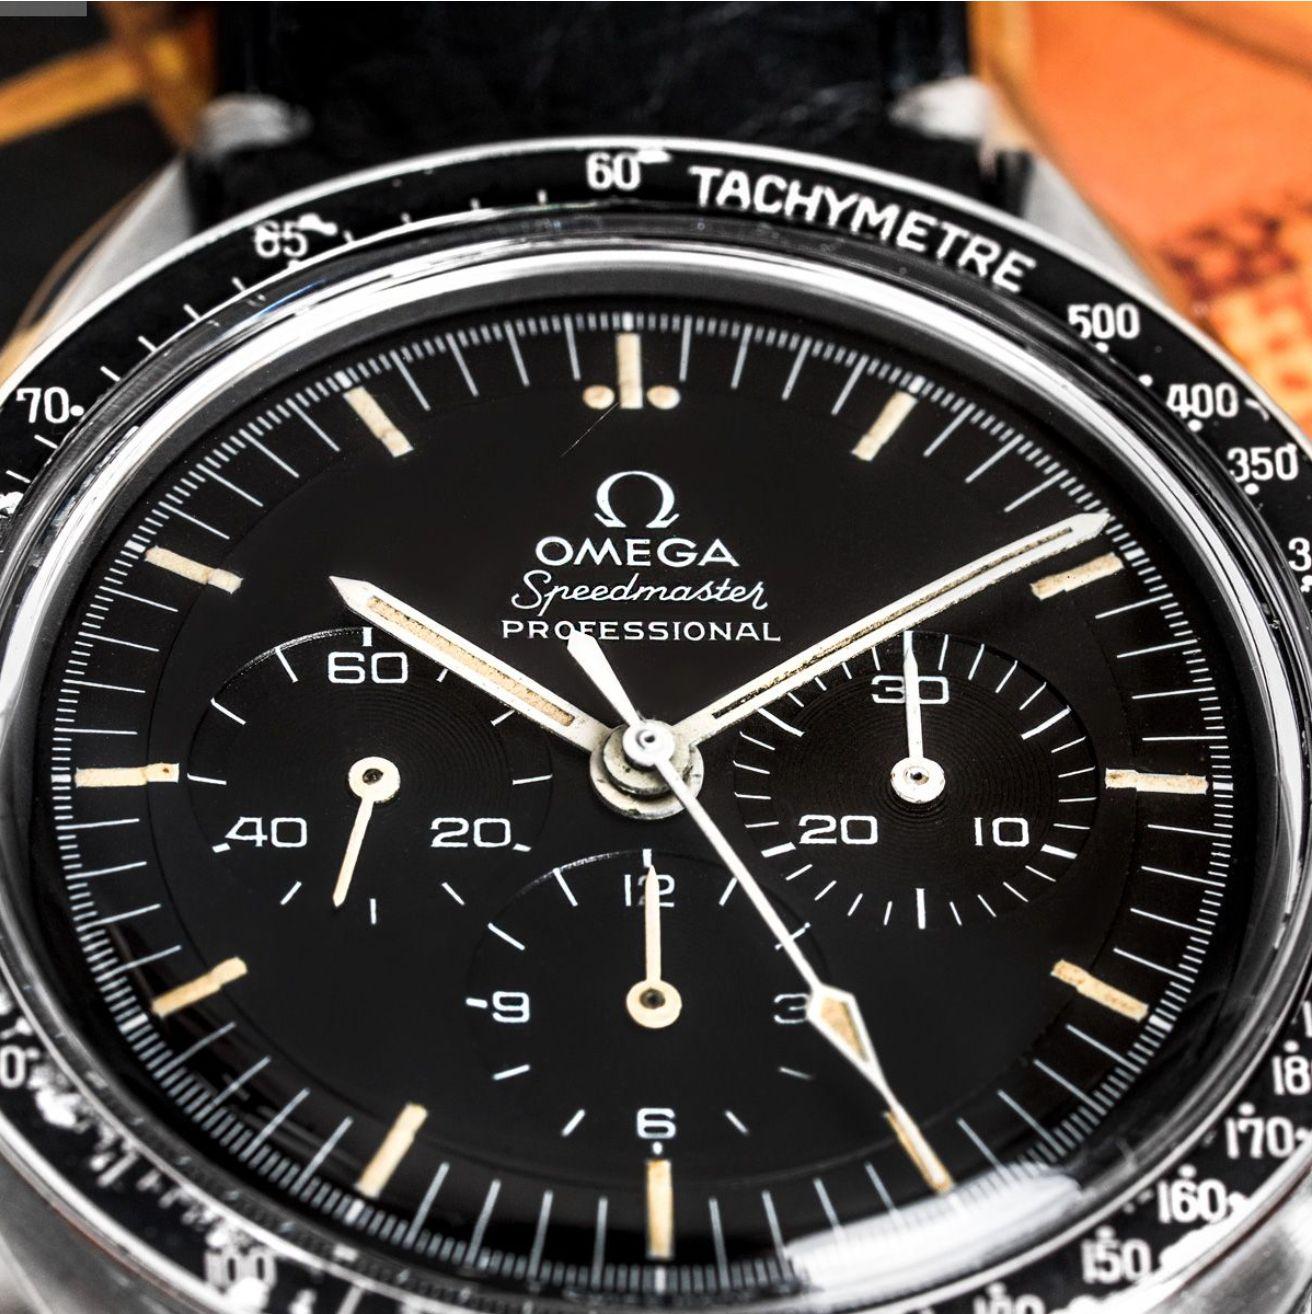 A stainless steel vintage Speedmaster Professional wristwatch by Omega. Featuring a black dial with 3 chronograph counters and a stainless steel fixed tachymetre bezel. Equipped with a generic black leather strap and an original steel deployant